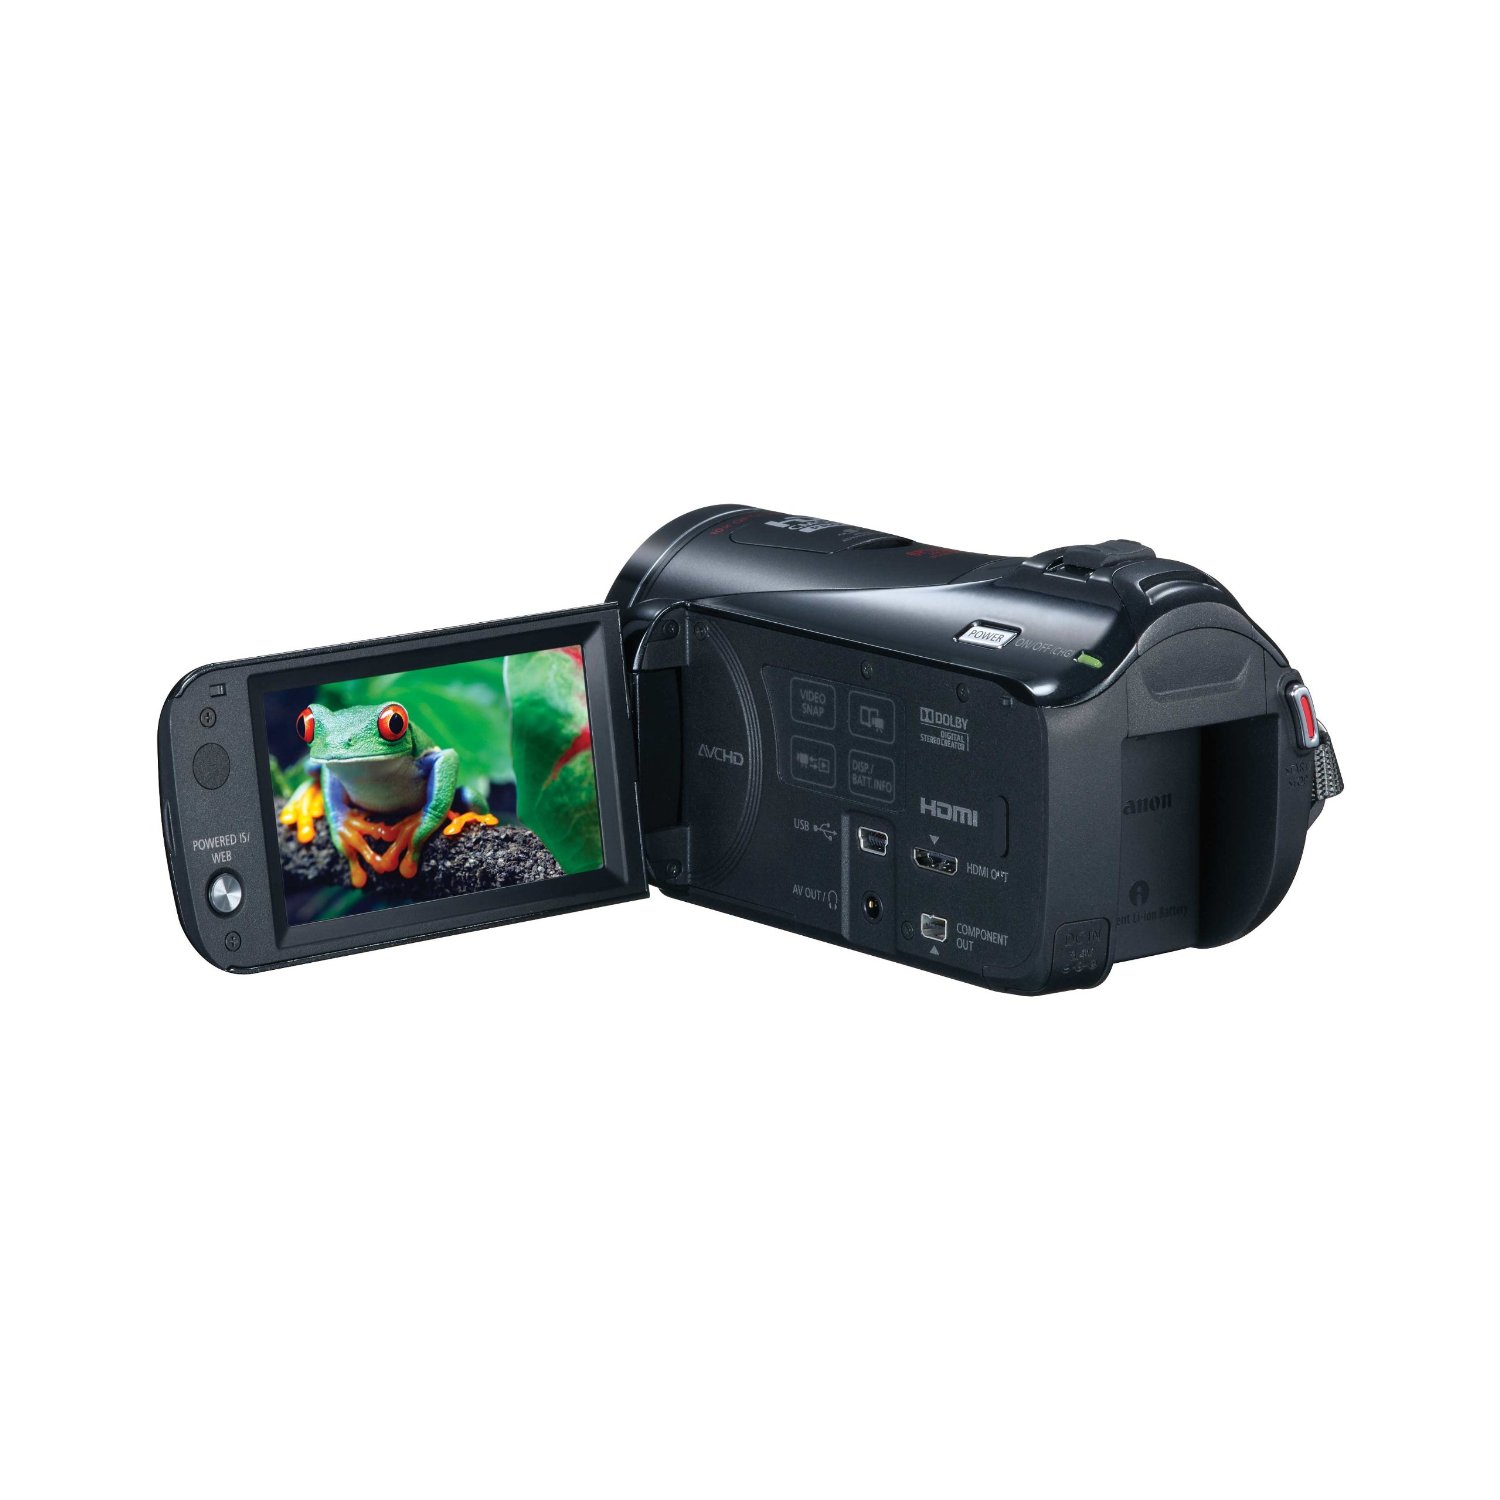 http://thetechjournal.com/wp-content/uploads/images/1111/1320777175-canon-vixia-hf-m40-full-hd-camcorder-with-hd-cmos-pro-4.jpg